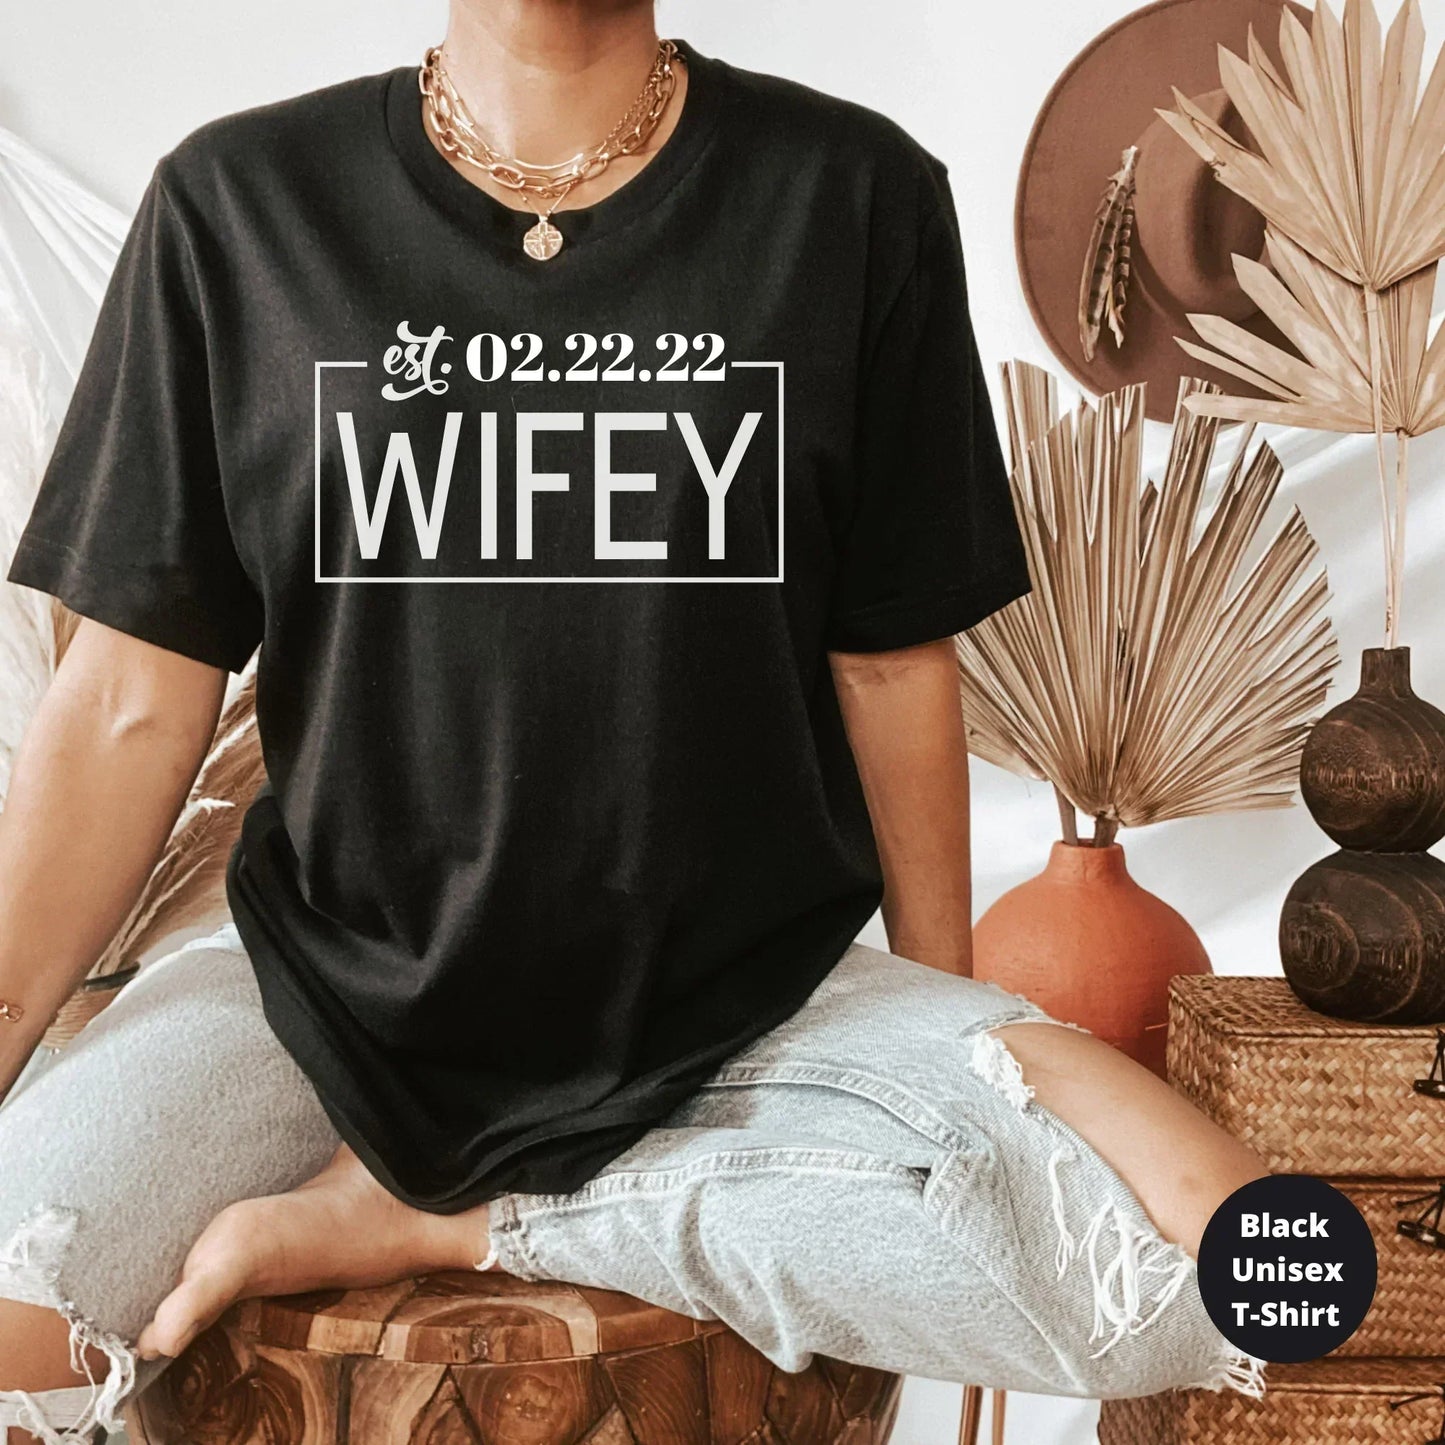 Mr and Mrs Shirts, Just Married Shirts, Mrs Sweatshirt, Wife Shirt, Wifey Sweatshirt, Future Mrs Shirt, Hubby Wifey Shirts, Wifey Hoodie HMDesignStudioUS